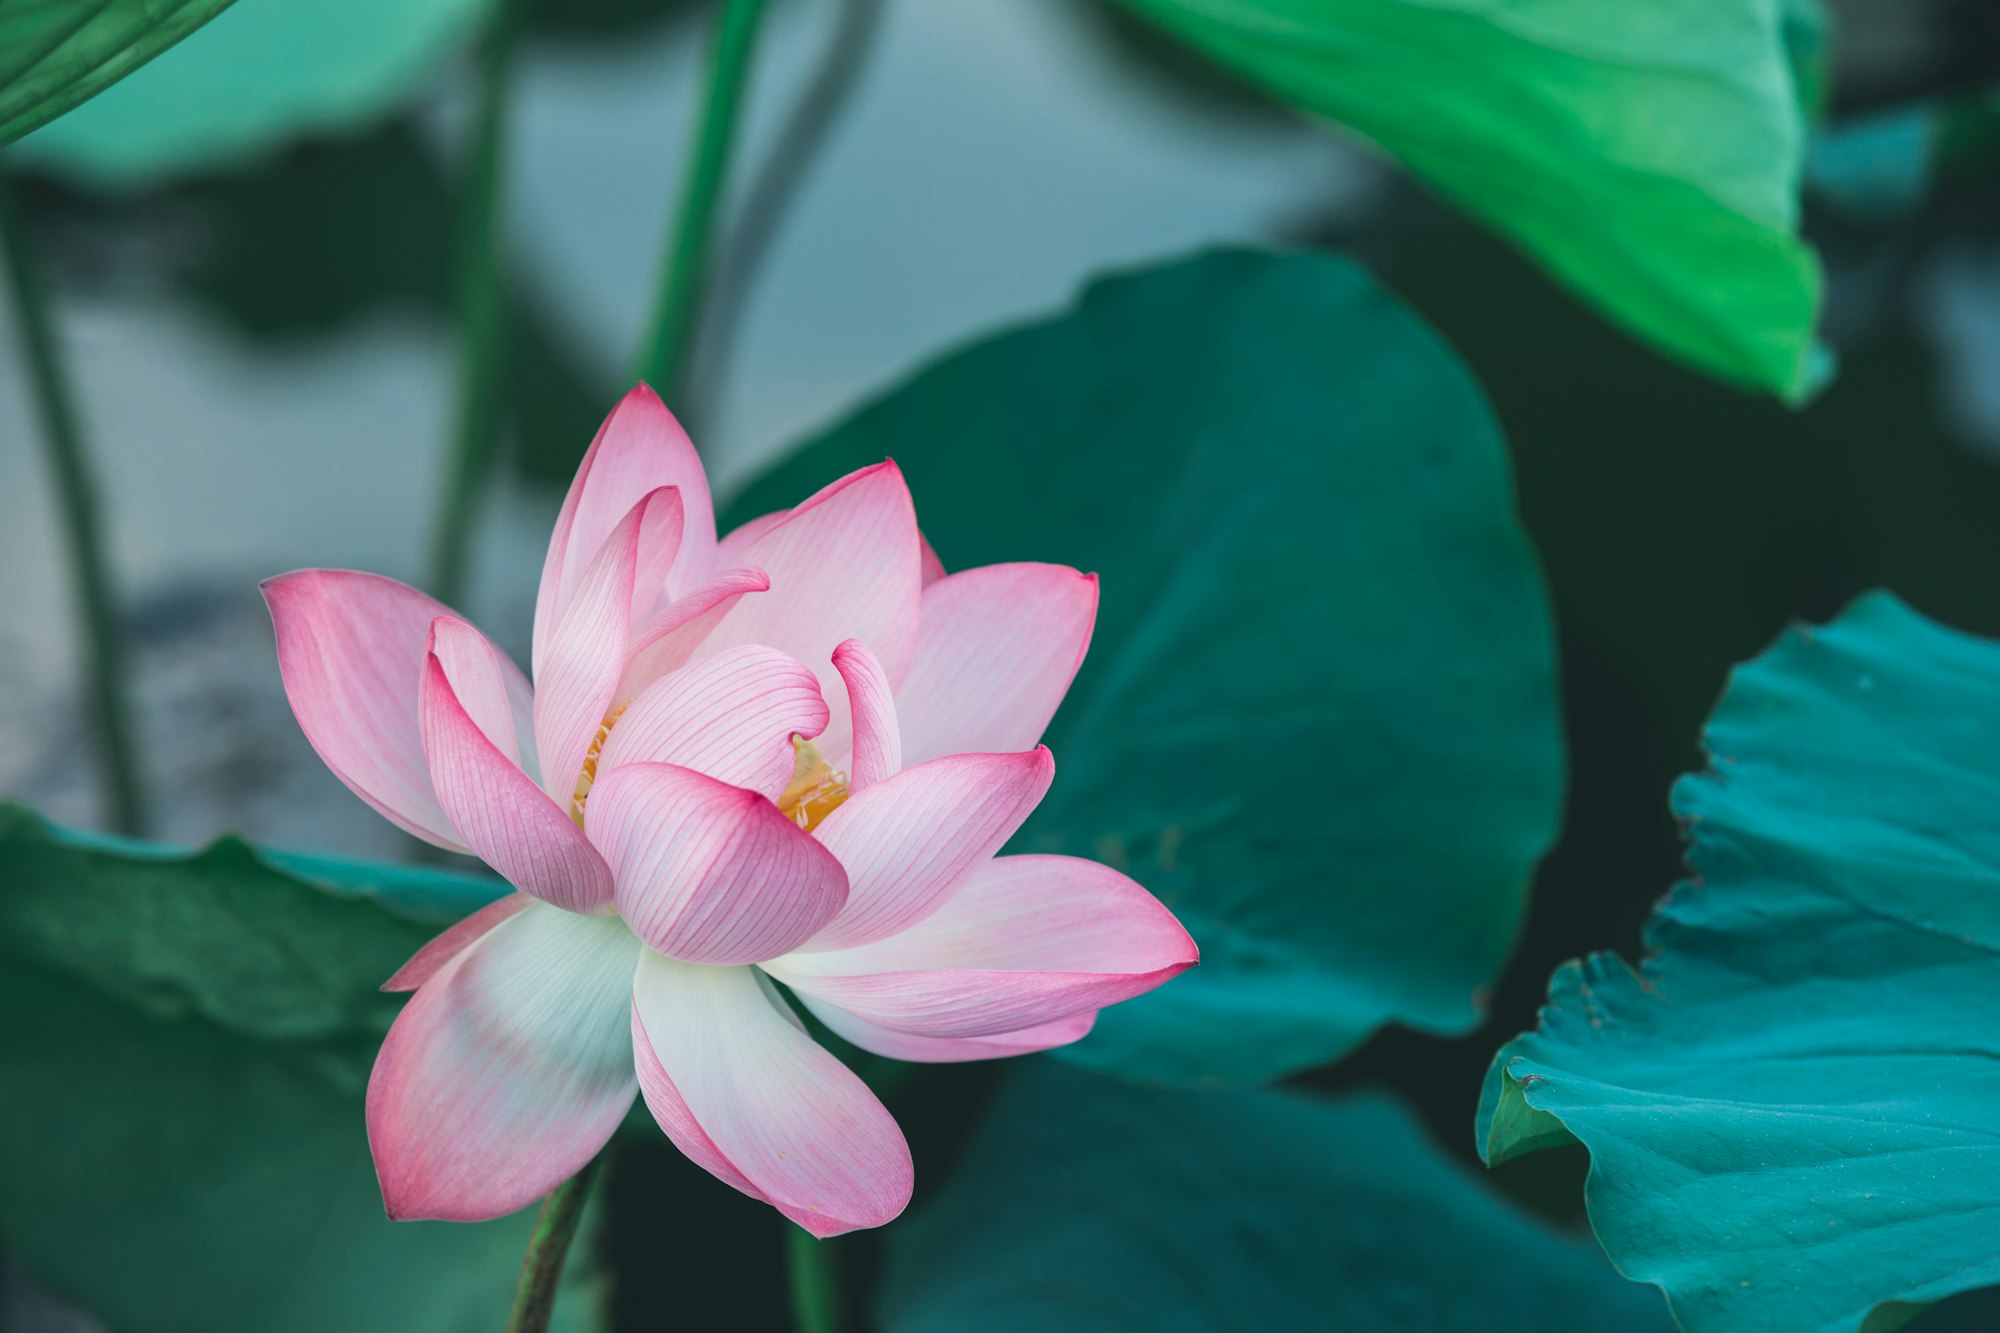 Beautiful pink lotus flower with green leaves in pond